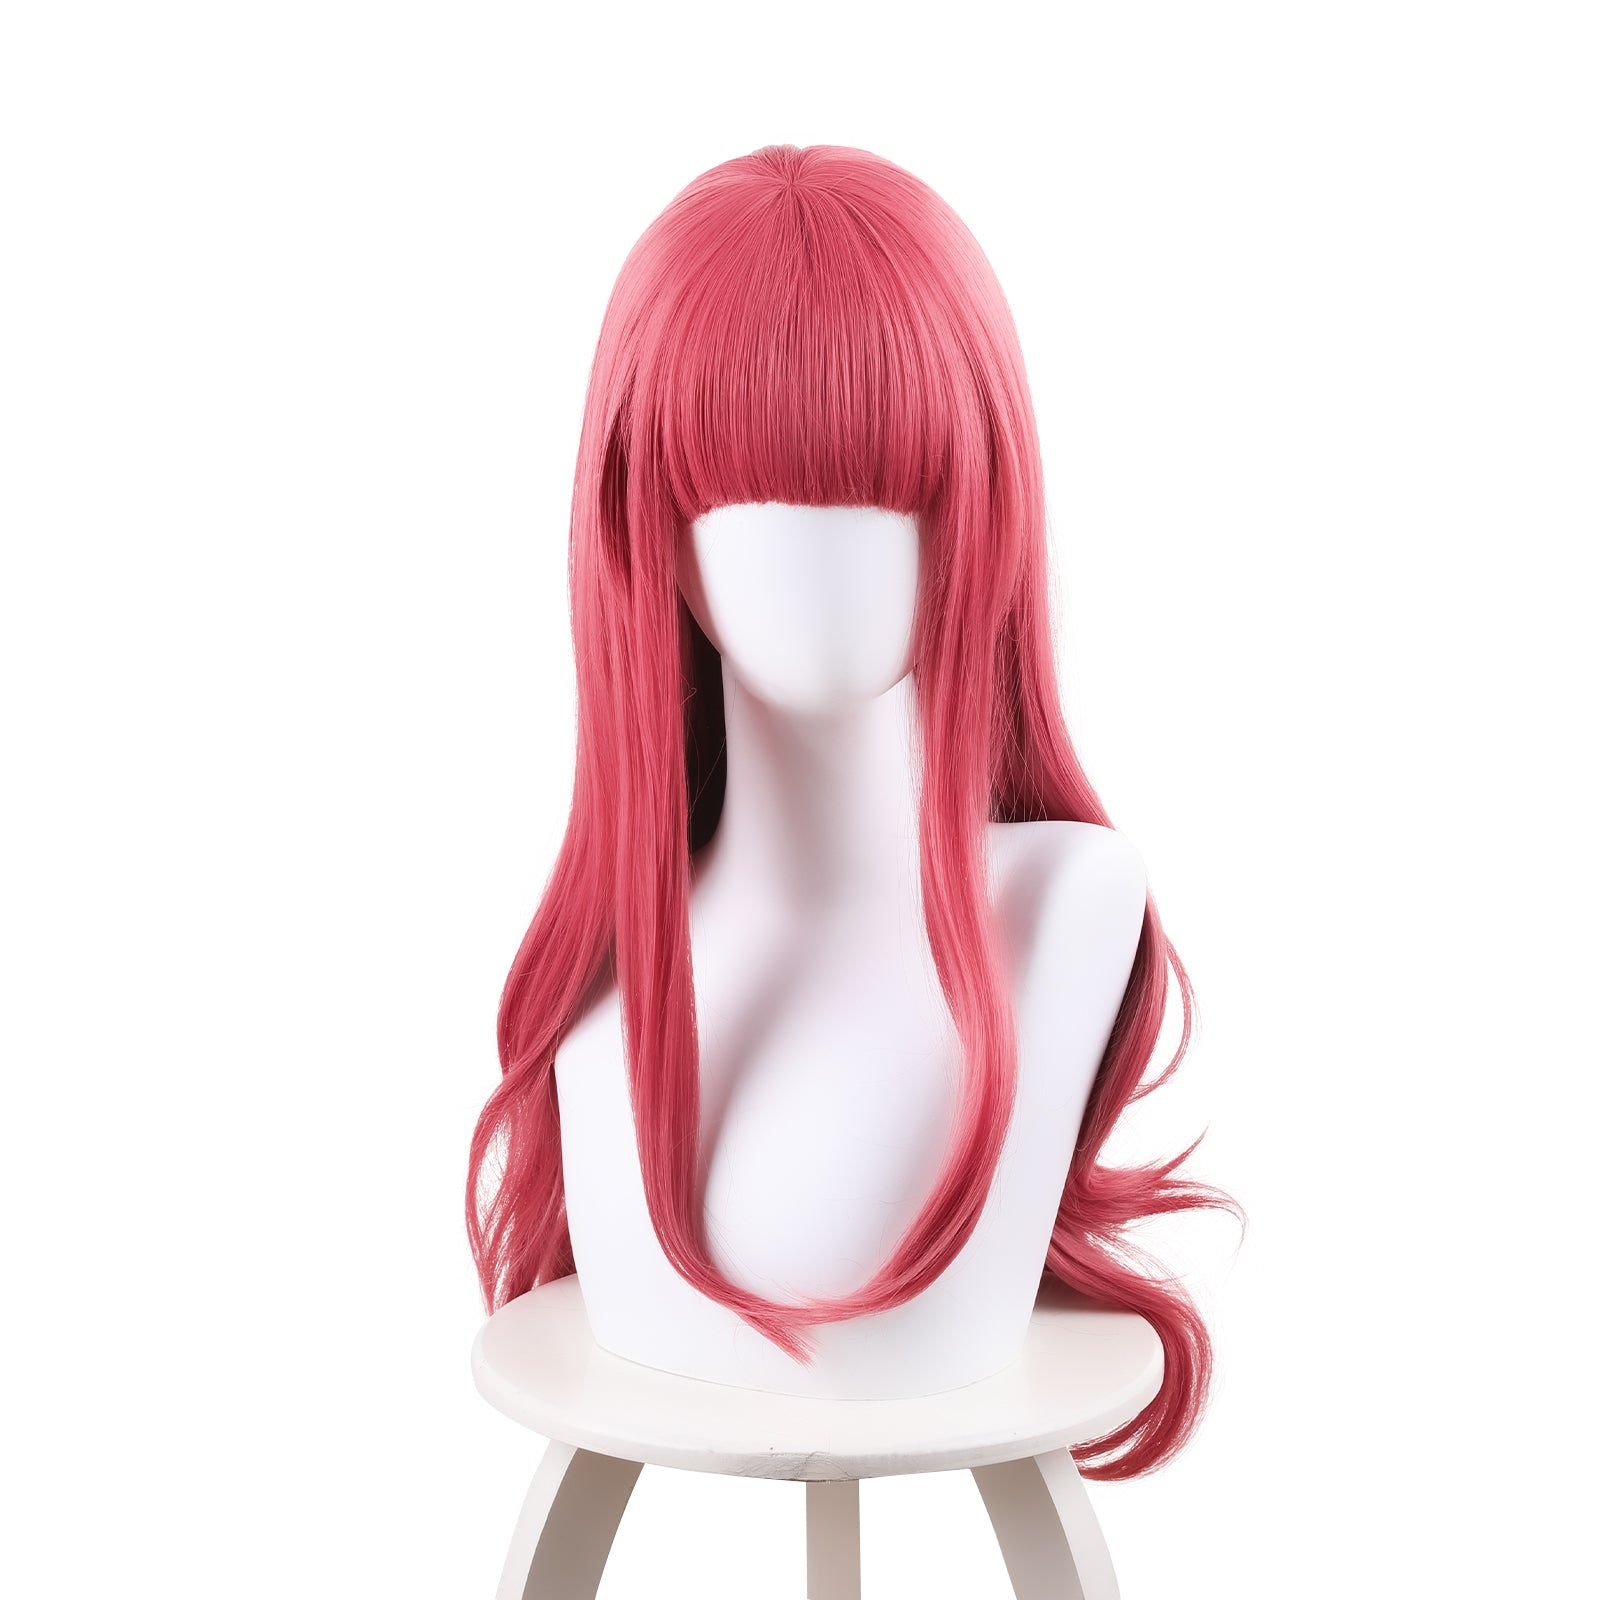 Rulercosplay Anime Paradox Live Anne Faulkner Long Red Cosplay Wig